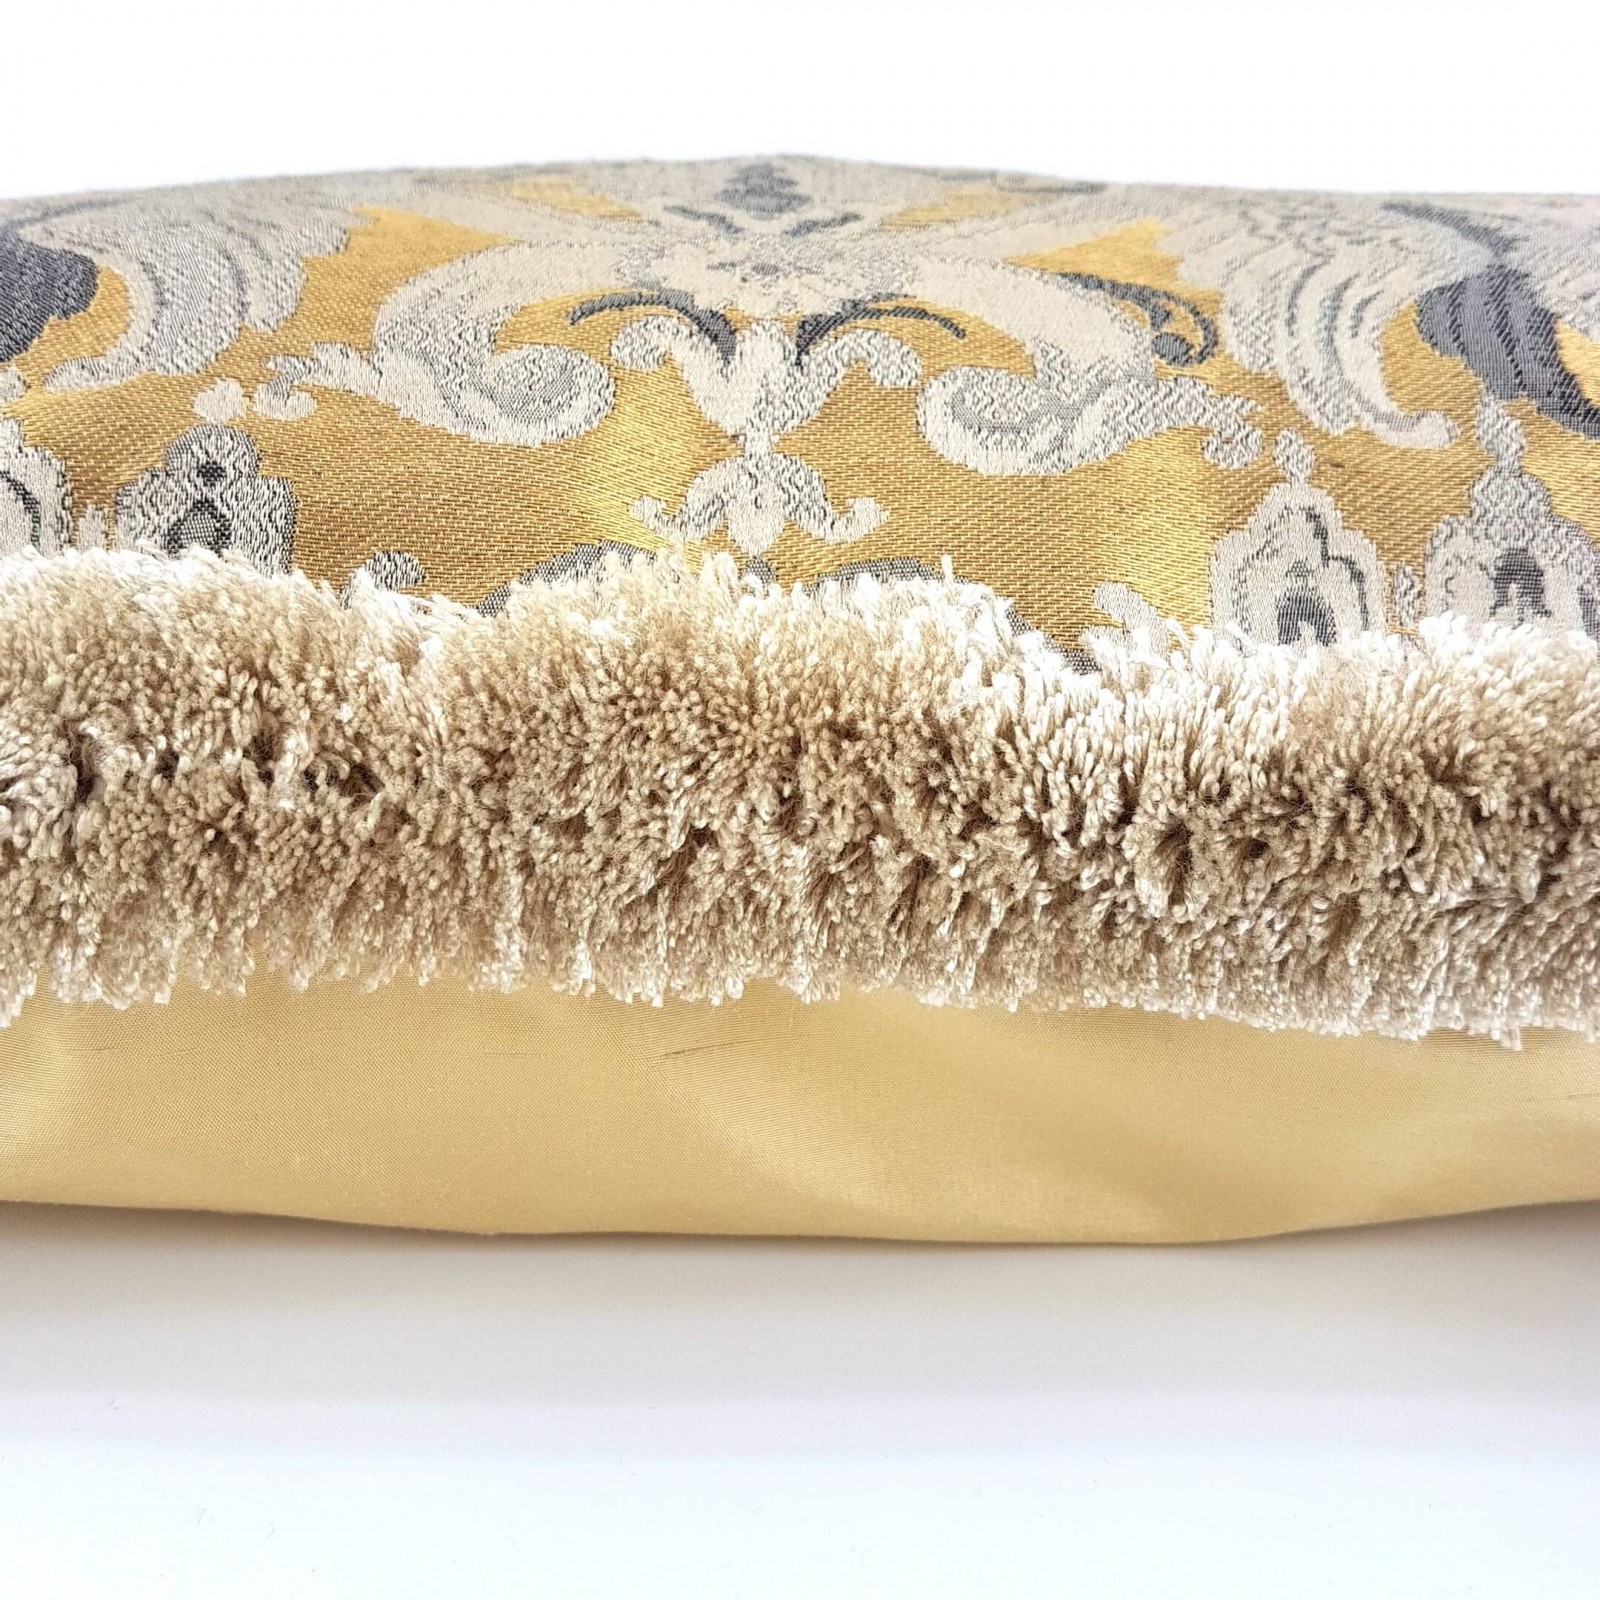 Brush Case Silk with Gold Fringe Pillow Brocatelle Antique